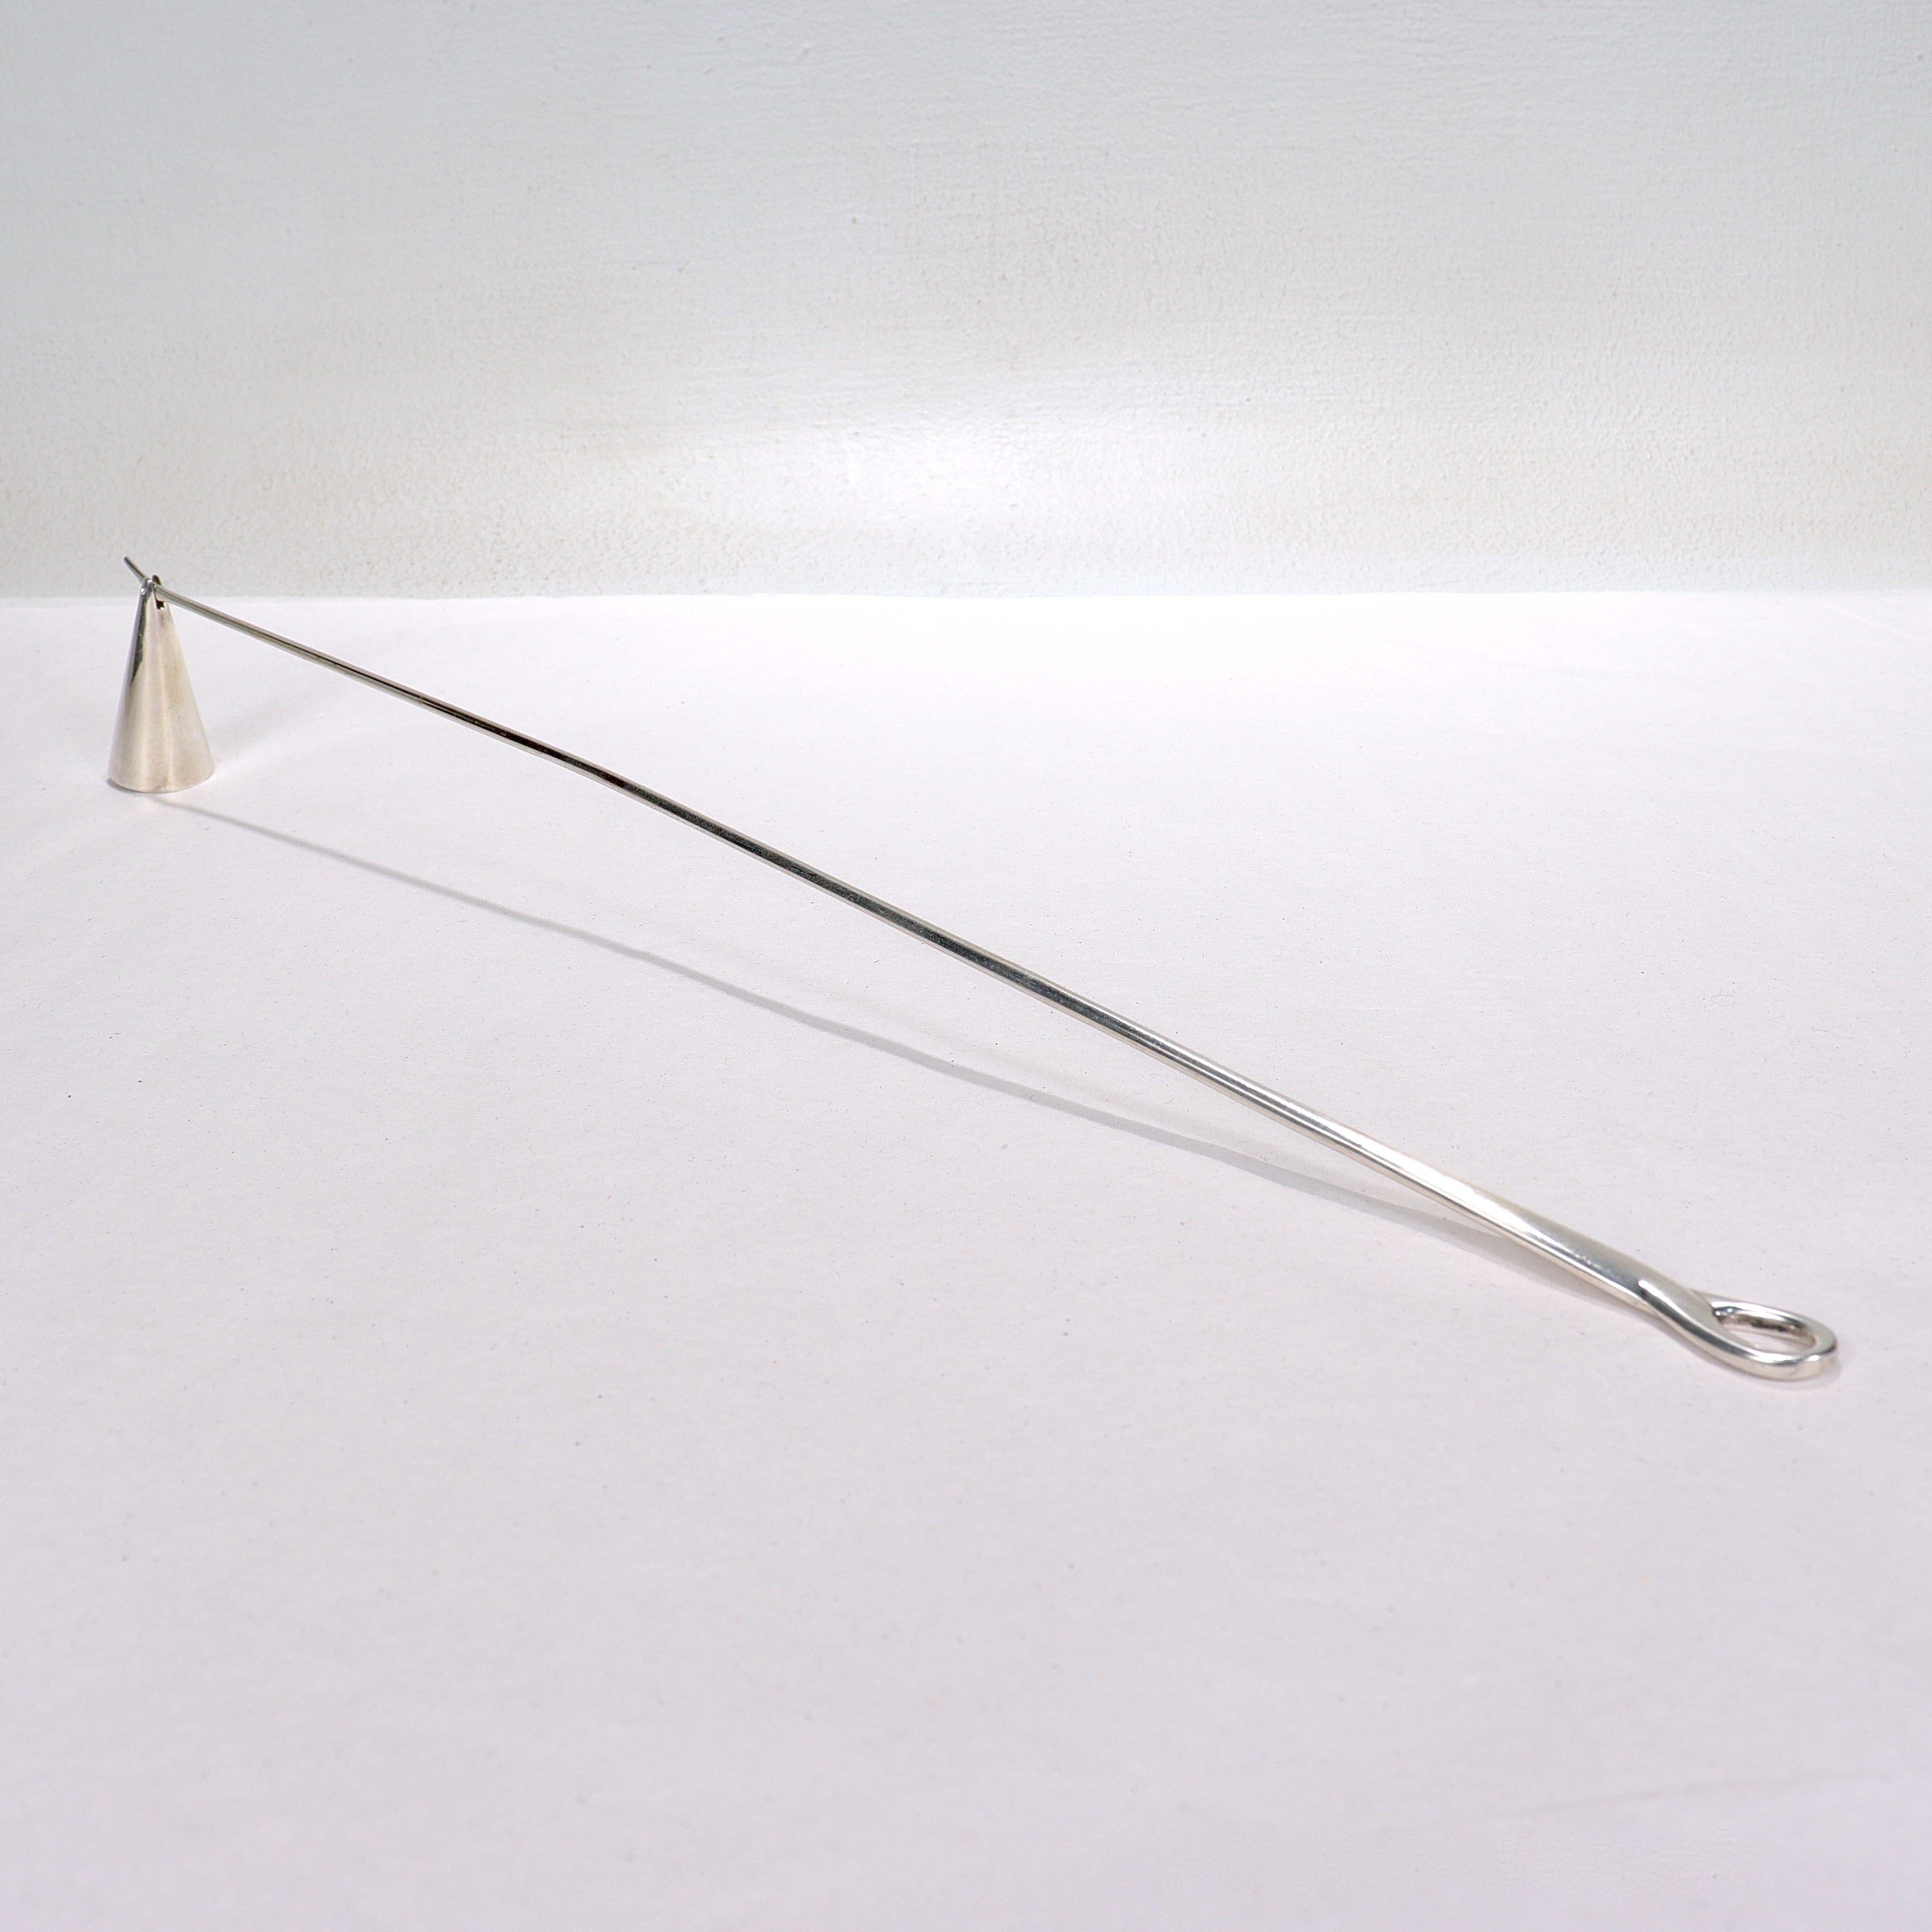 A fine sterling silver candle snuffer.

In the Padova line by Elsa Peretti.

By Tiffany & Co.

With a copyright mark for 1984.

Simply a wonderful early version of the Padova candle snuffer!

Date:
1984

Overall Condition:
It is in overall good,